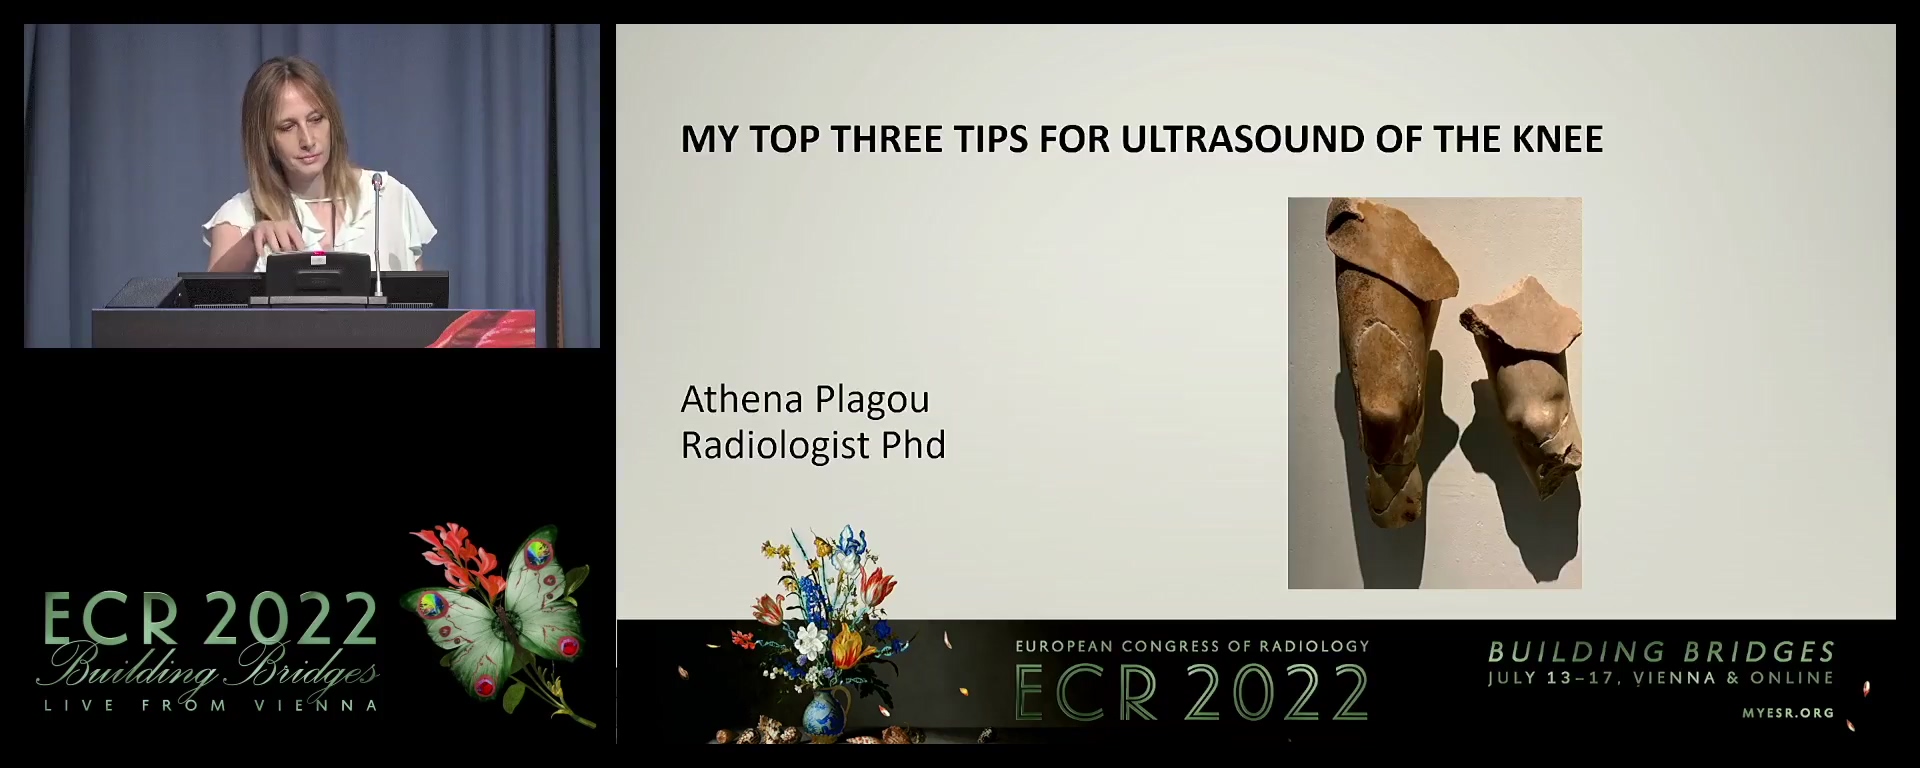 My top three tips for ultrasound of the knee - Athena Plagou, Athens / GR